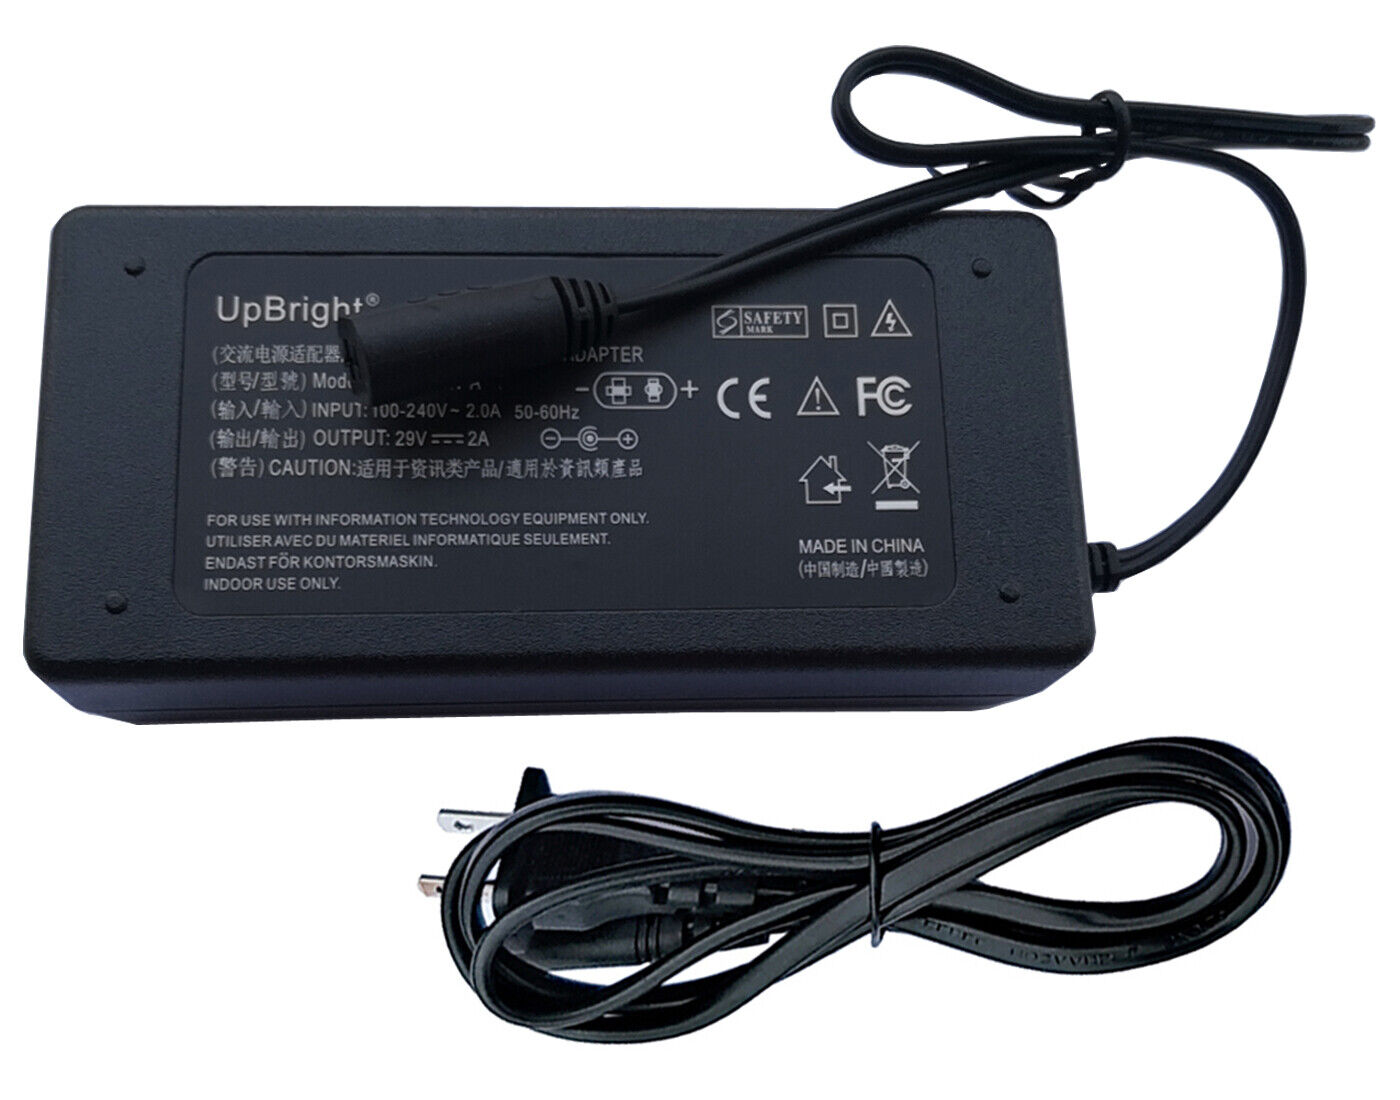 29V 2A 58W AC Adapter For rbd W58RA199-290020 Sofa Lift Chair or Power Recliner